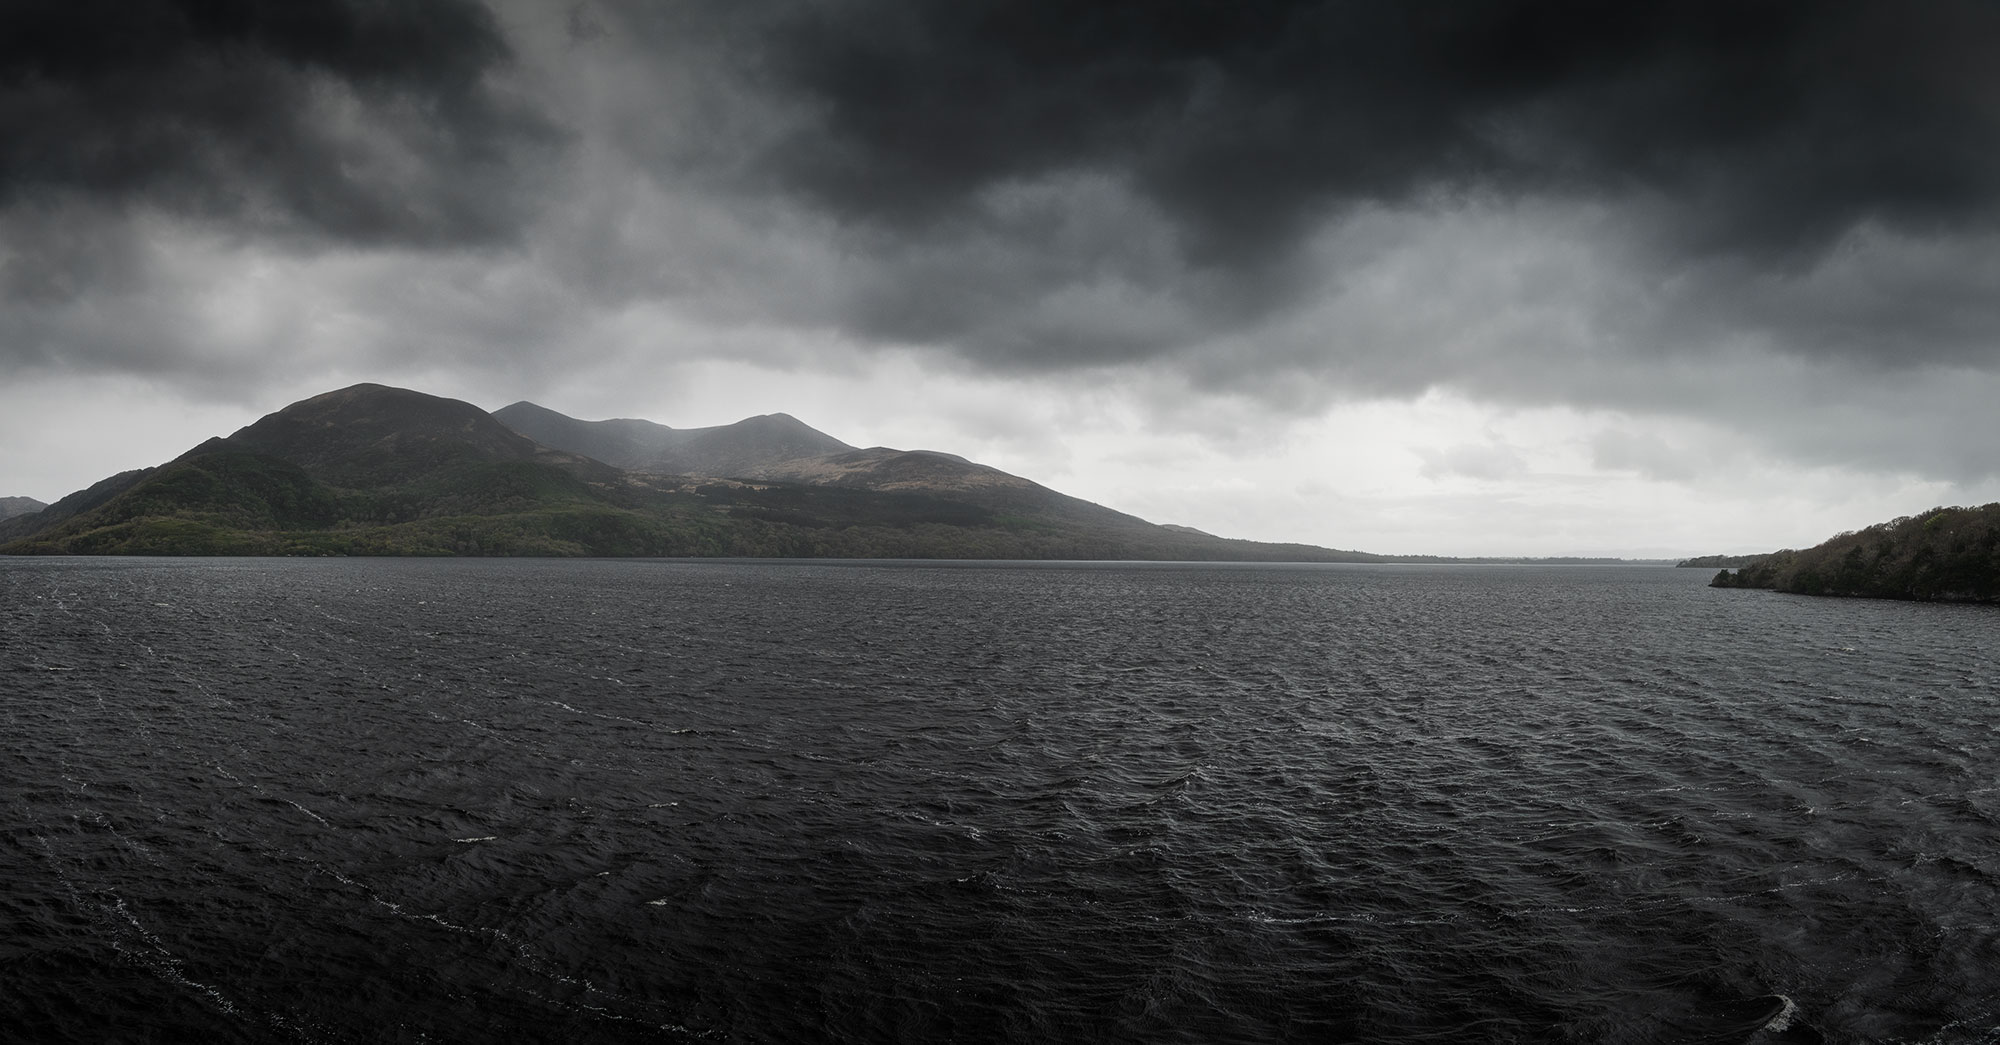 A panoramic landscape photograph of the Lakes of Killarney in Ireland, showcasing a dramatic sky on a rainy day. The image captures the wild beauty of the Wild Atlantic Way, taken with a Nikon Z8 camera.